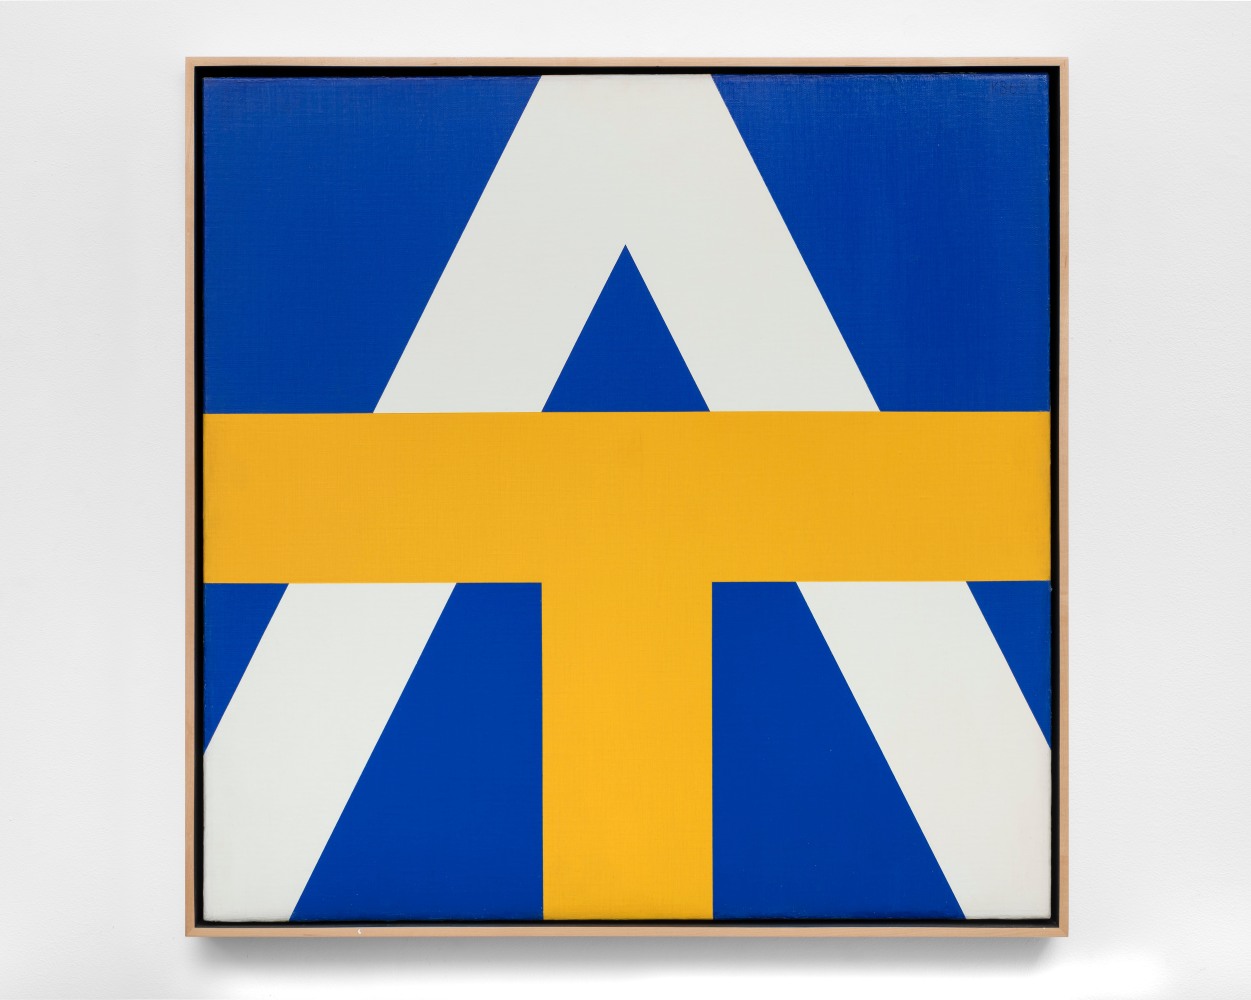 #1, 1965 oil on canvas 30 x 30 inches; 76.2 x 76.2 centimeters LSFA# 01263